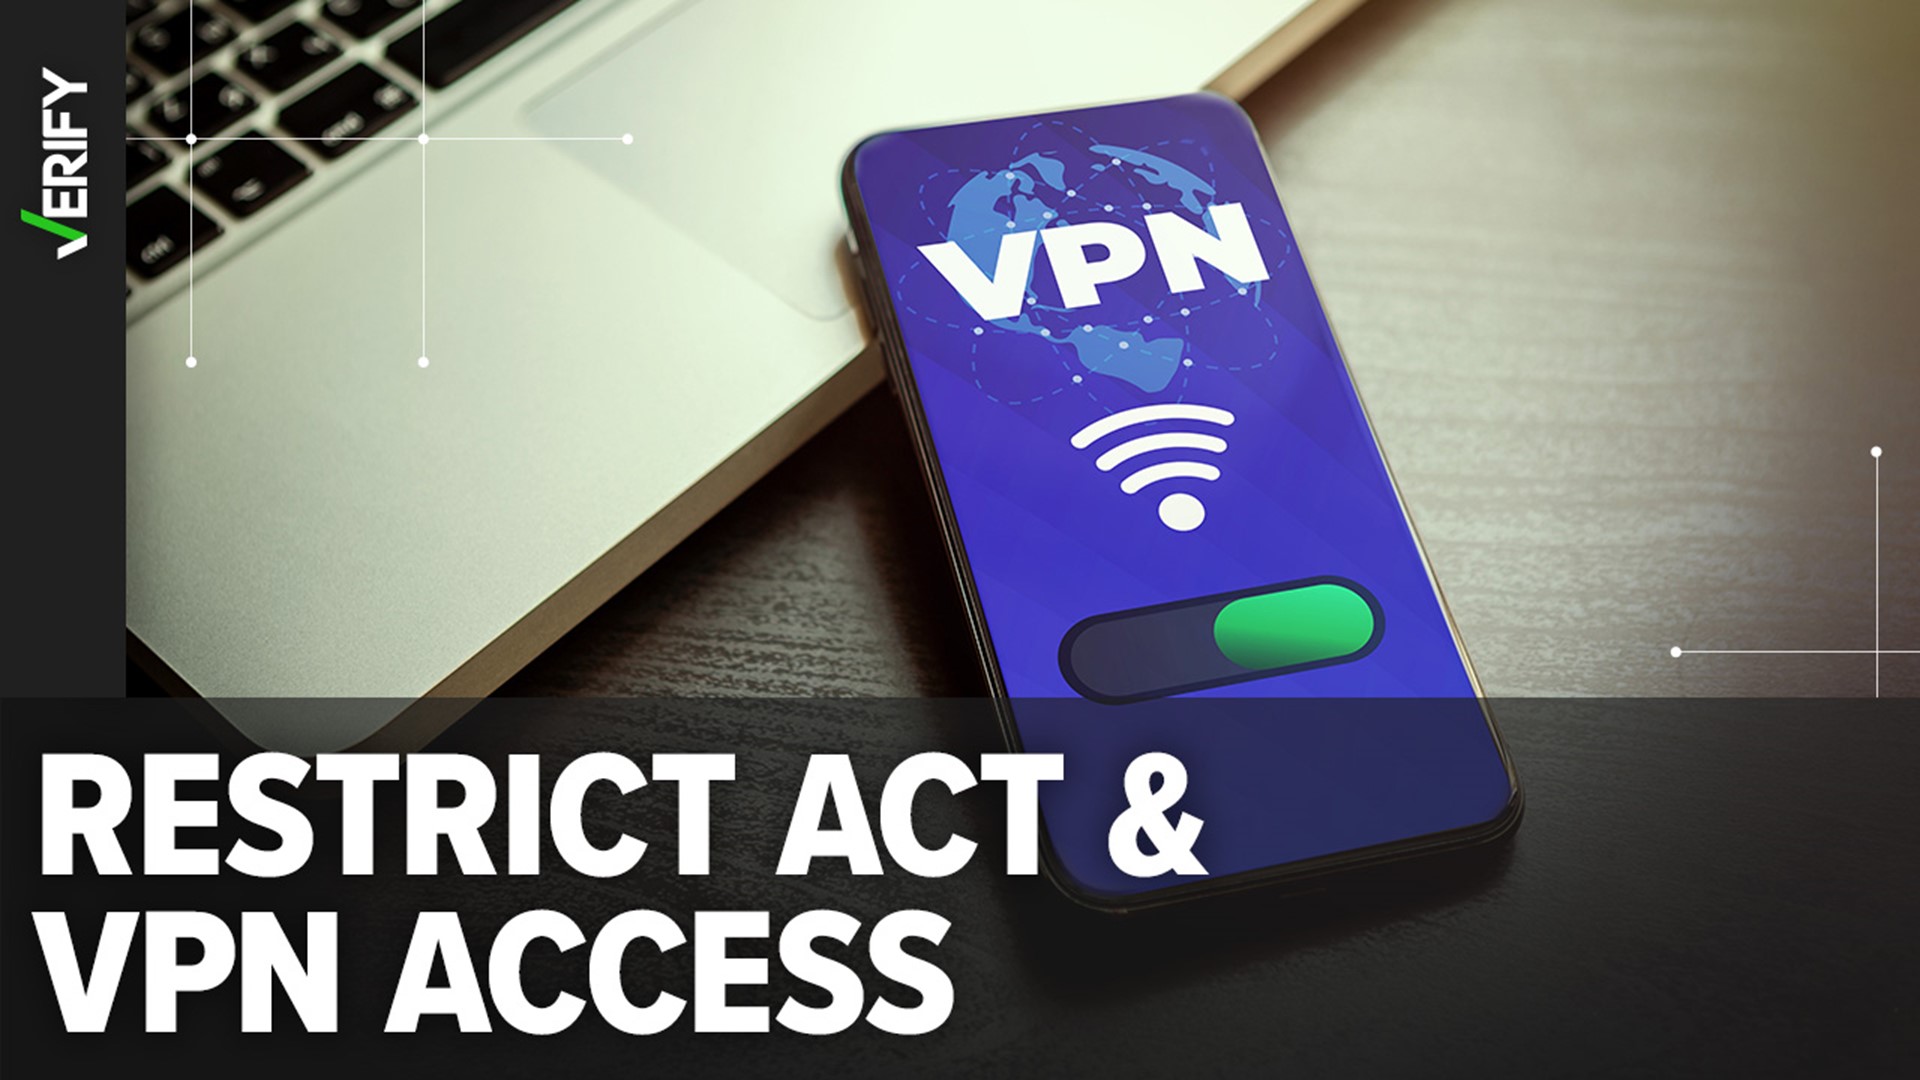 Several readers asked how the RESTRICT Act would affect VPN use. Here’s what we can VERIFY.